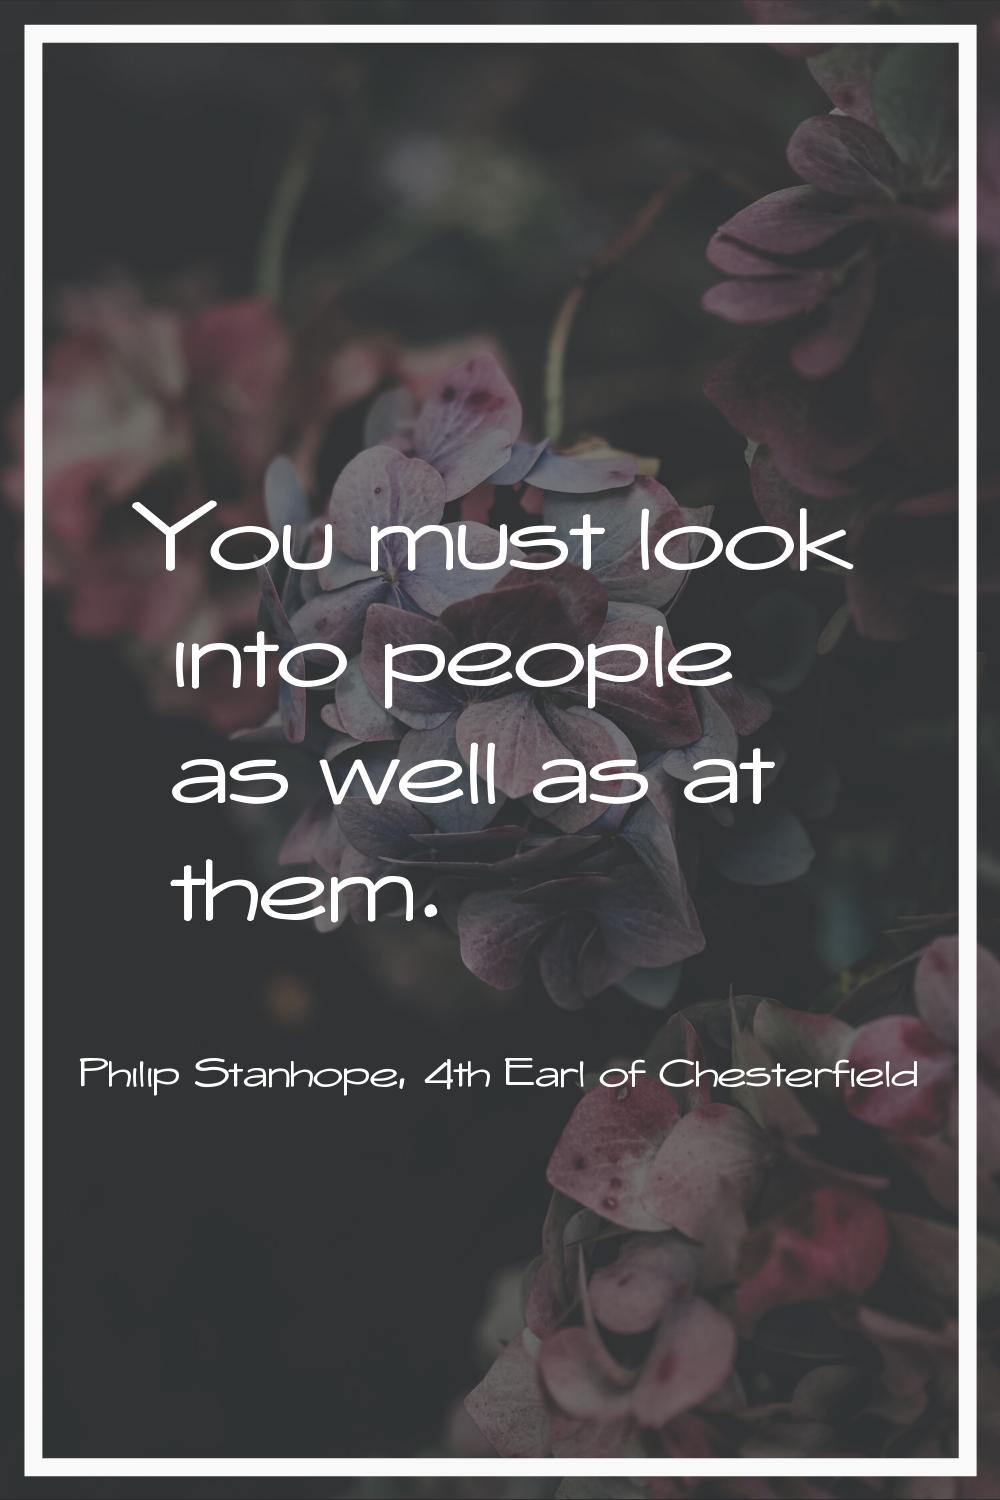 You must look into people as well as at them.